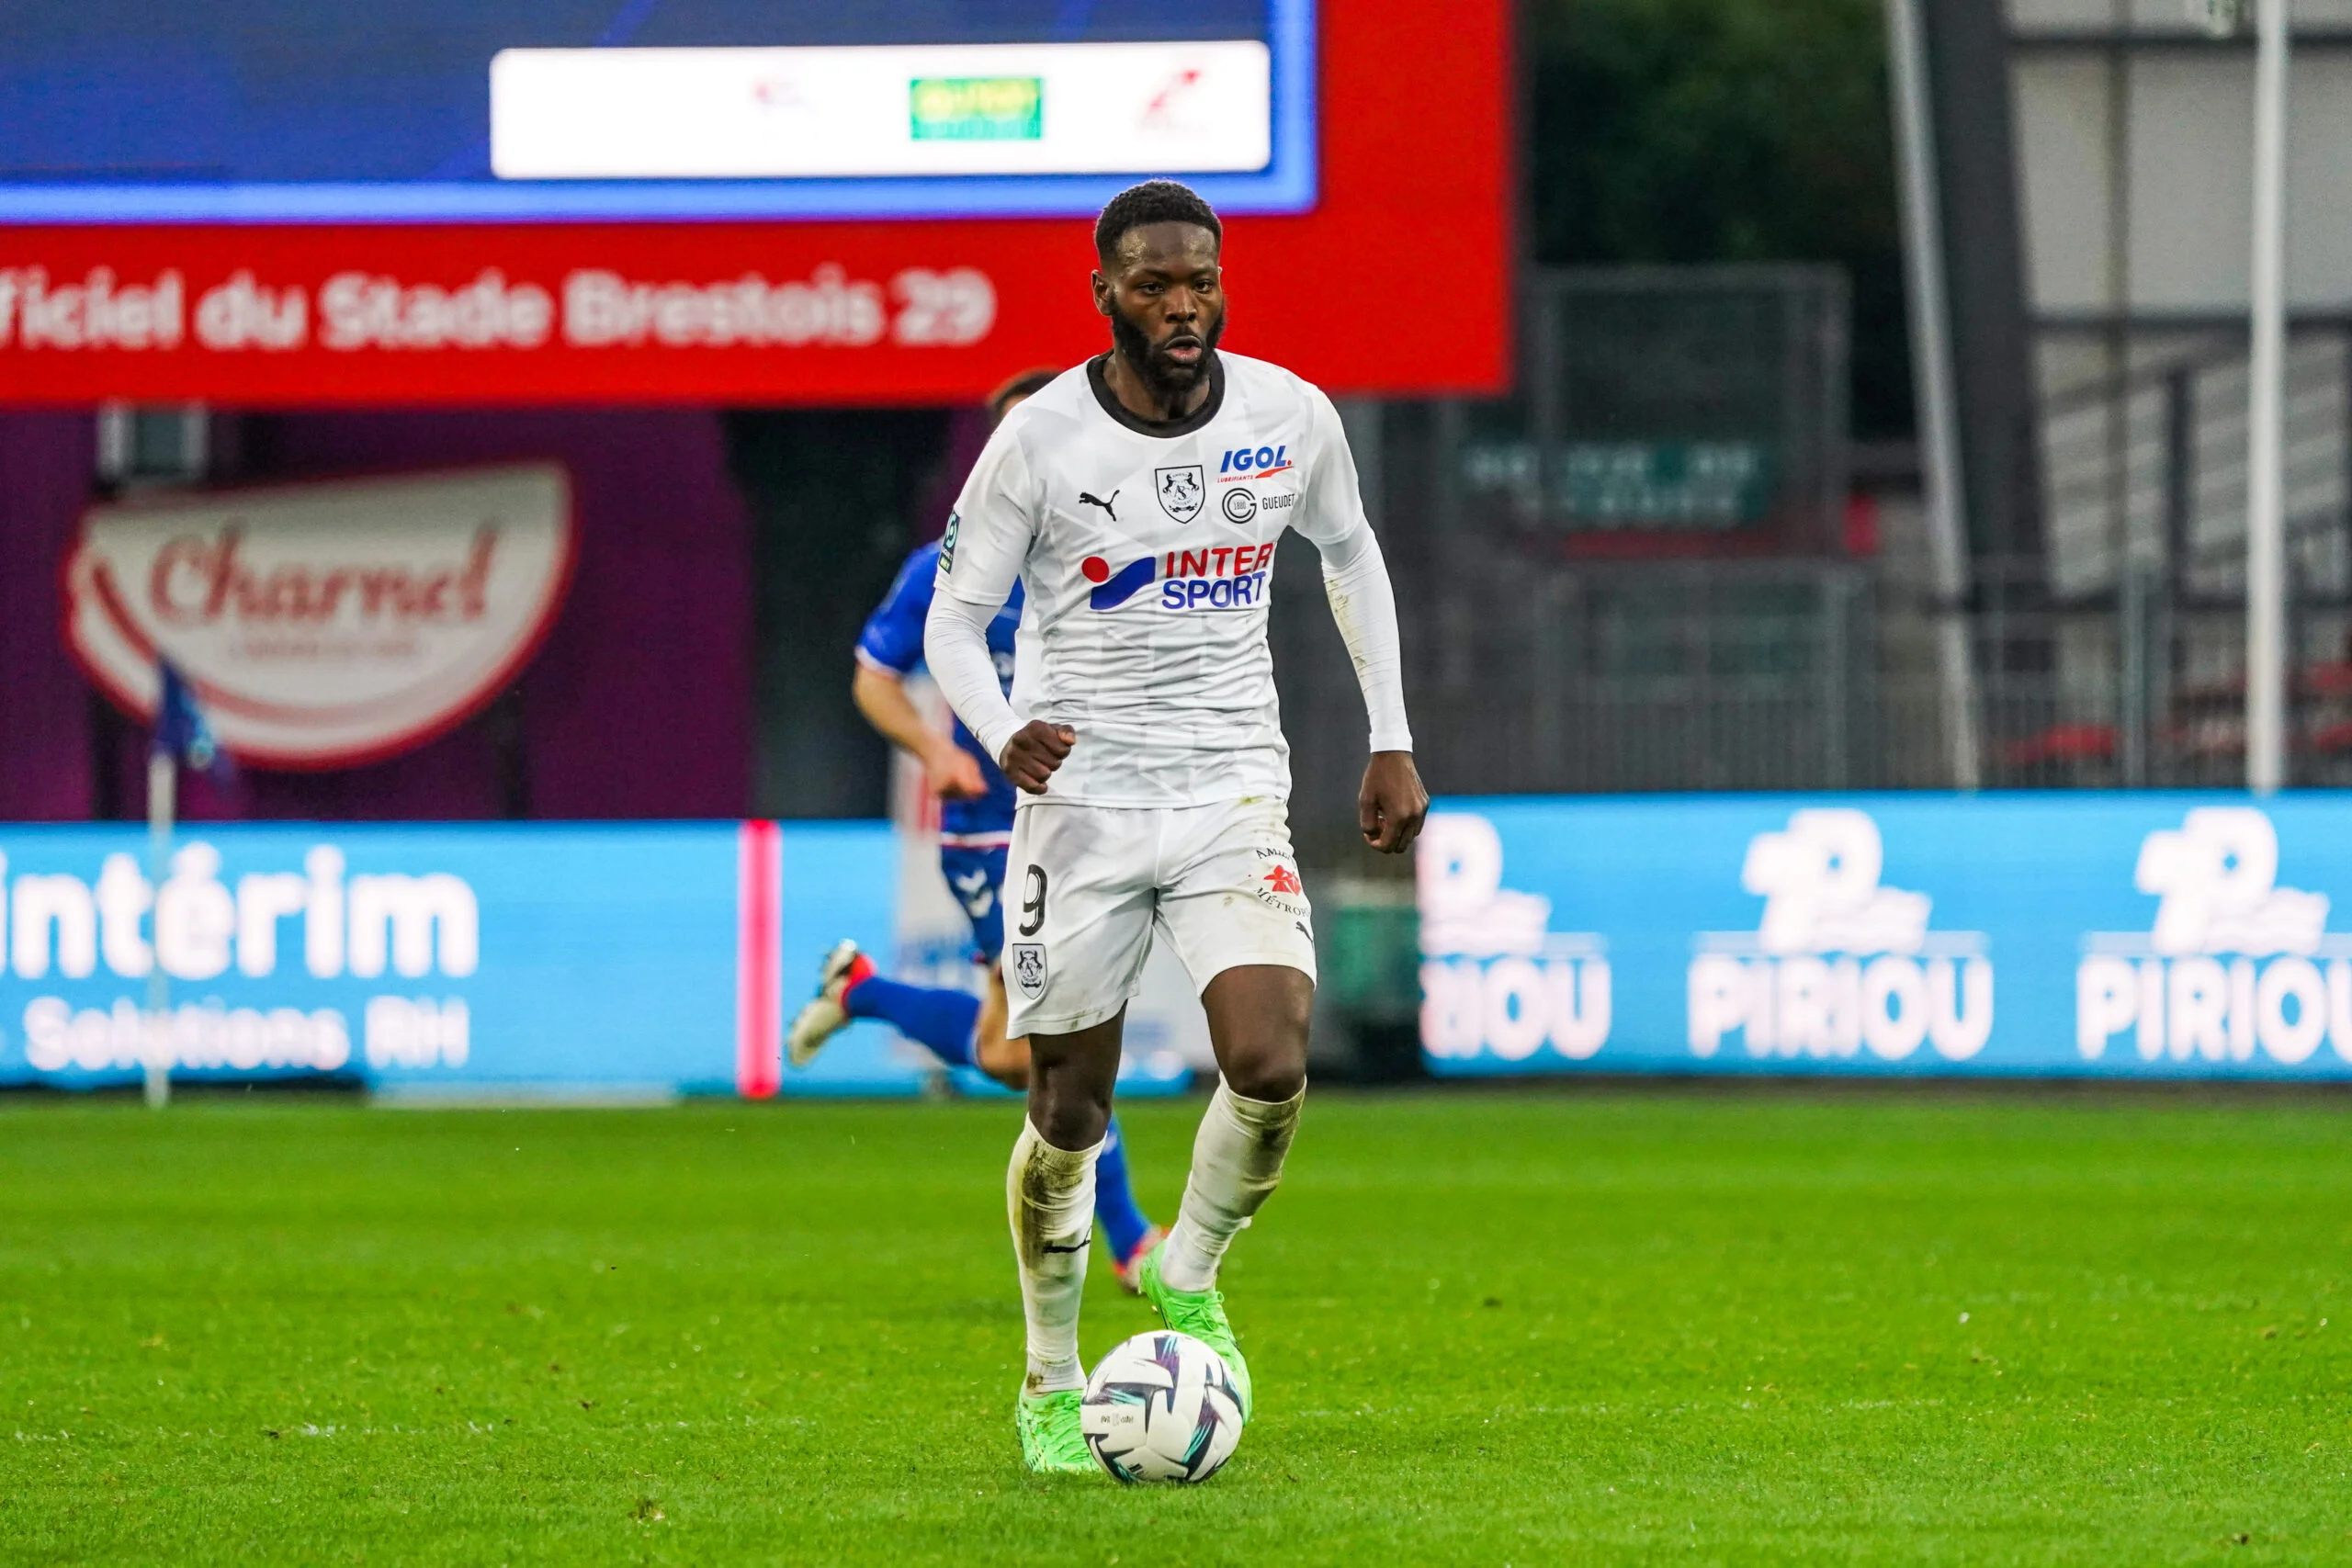 Louis Mafouta scoring a goal for Amiens in the Ligue 2 clash against Quevilly